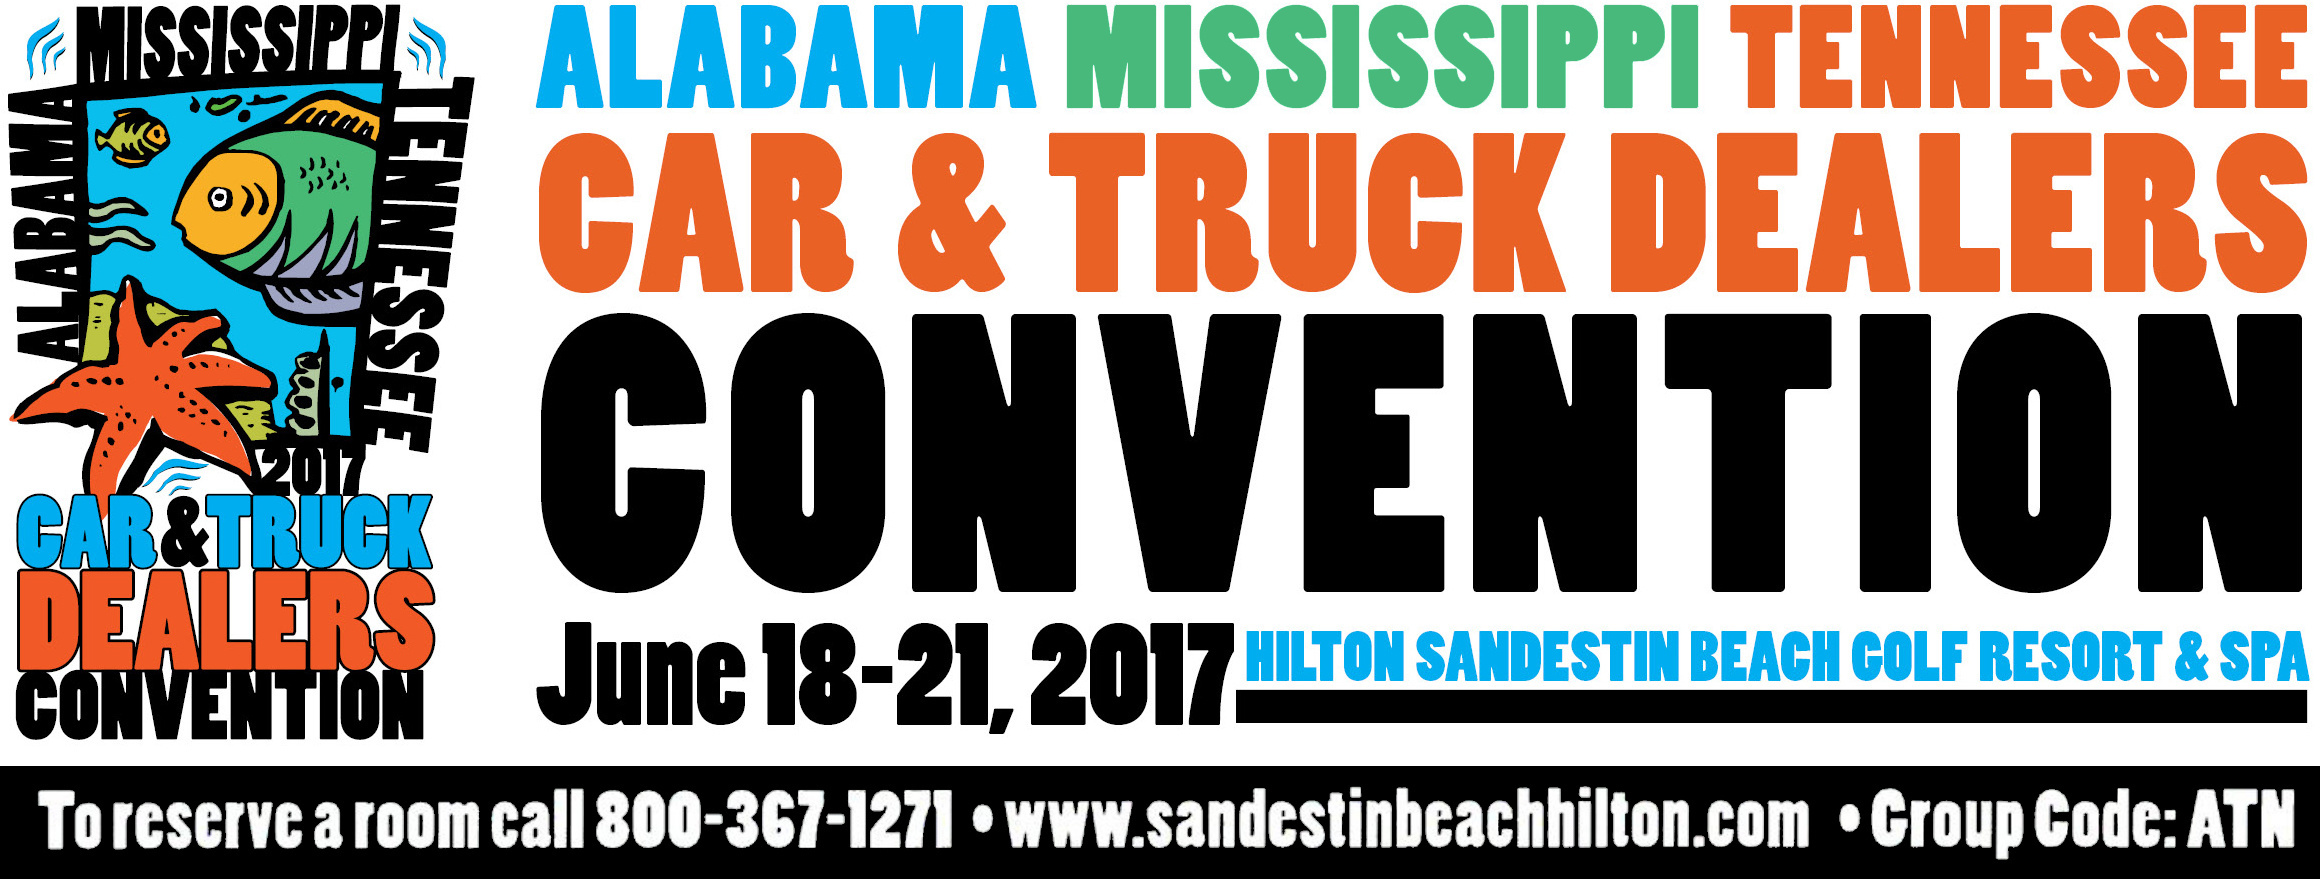 Car & Truck Dealers Convention 2017, June 18th - 21st, 2017